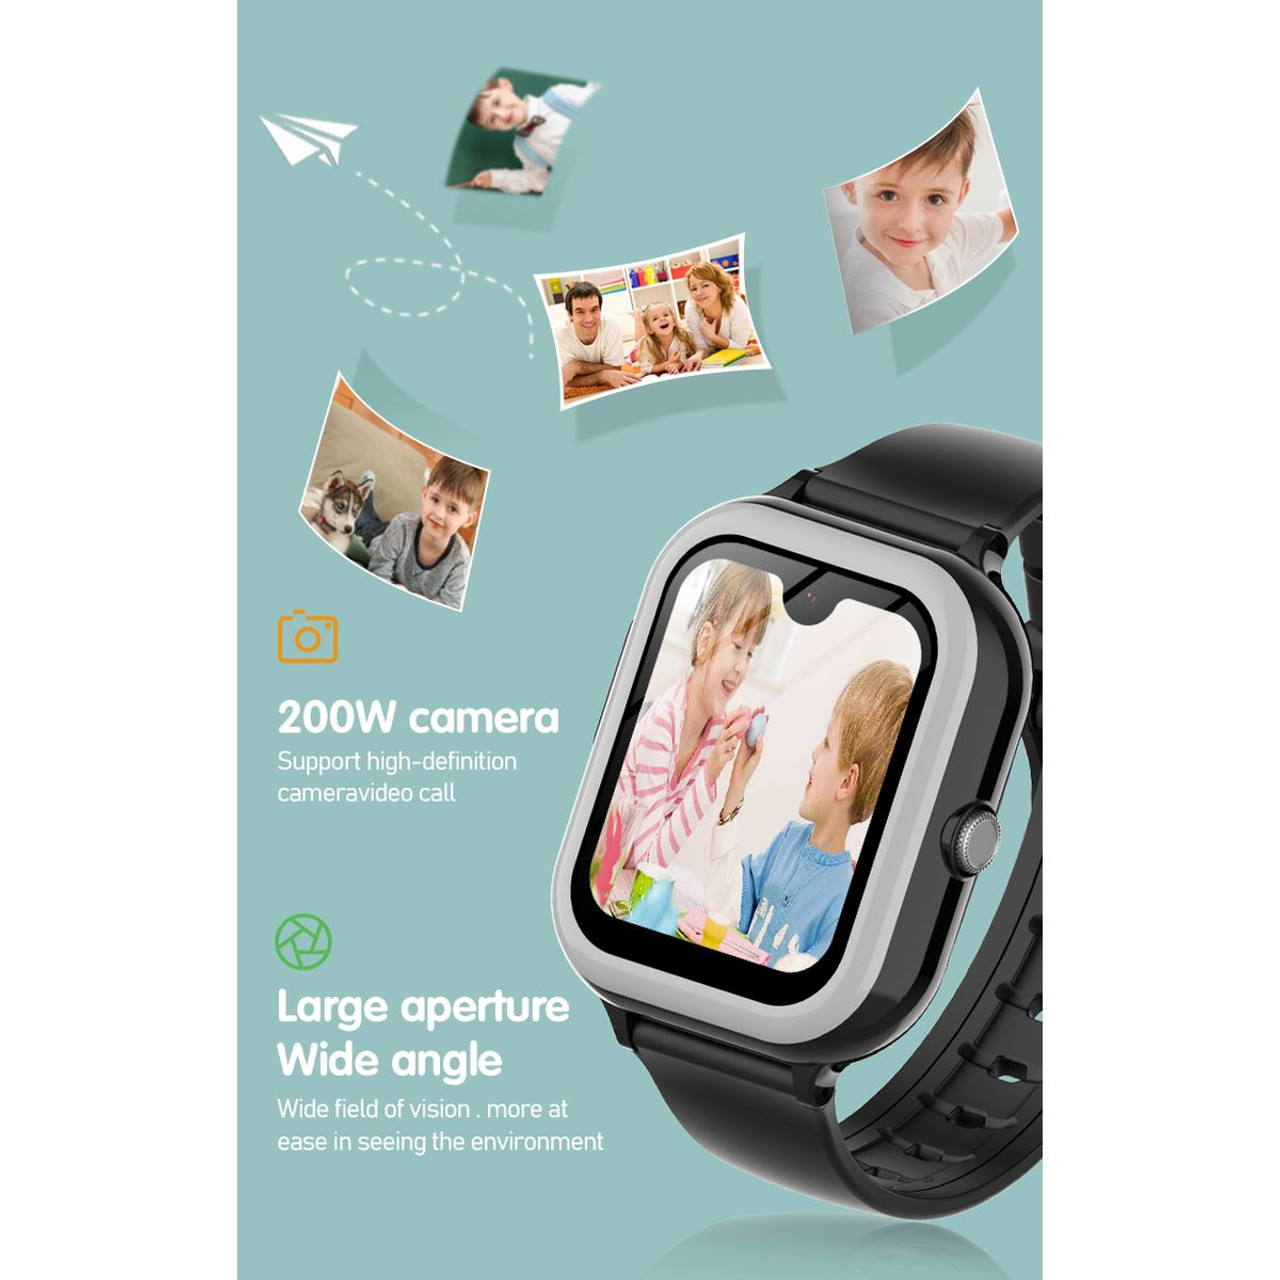 Kids smart watch 1.78 HD Screen,2 Megapixels Under Screen Camera,AMOLED, vedio call, Safety Calls, Camera, GPS,SOS,WHATSAPP boys and girls watch COL Pink product image